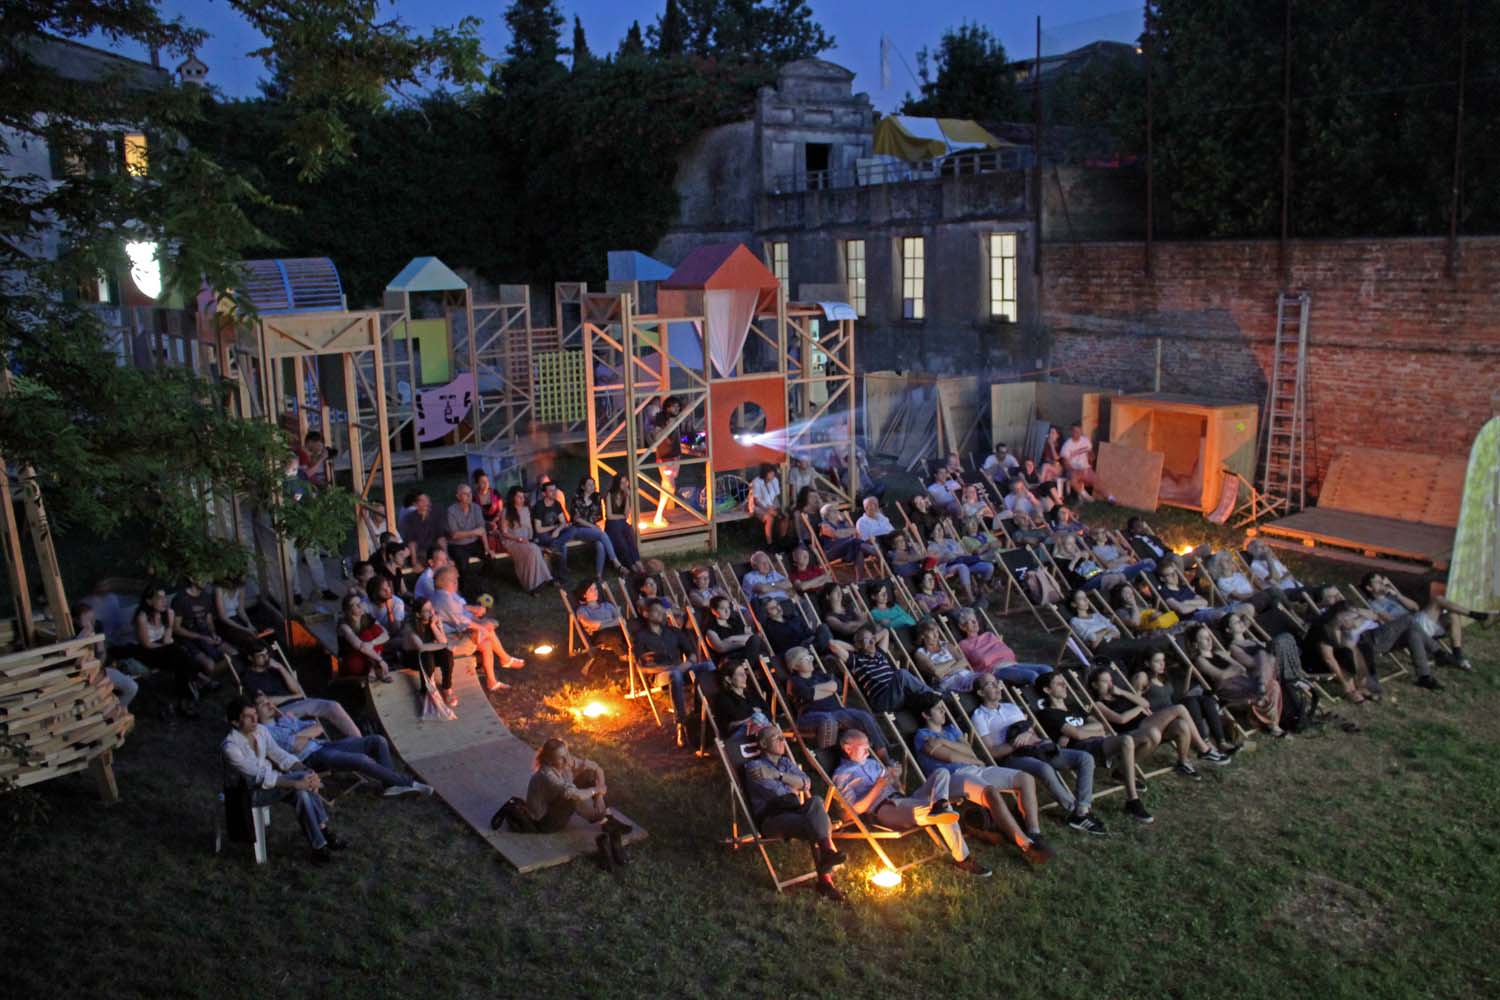 A large group of people sit in deckchairs in an enclosed garden space at night time watching a film